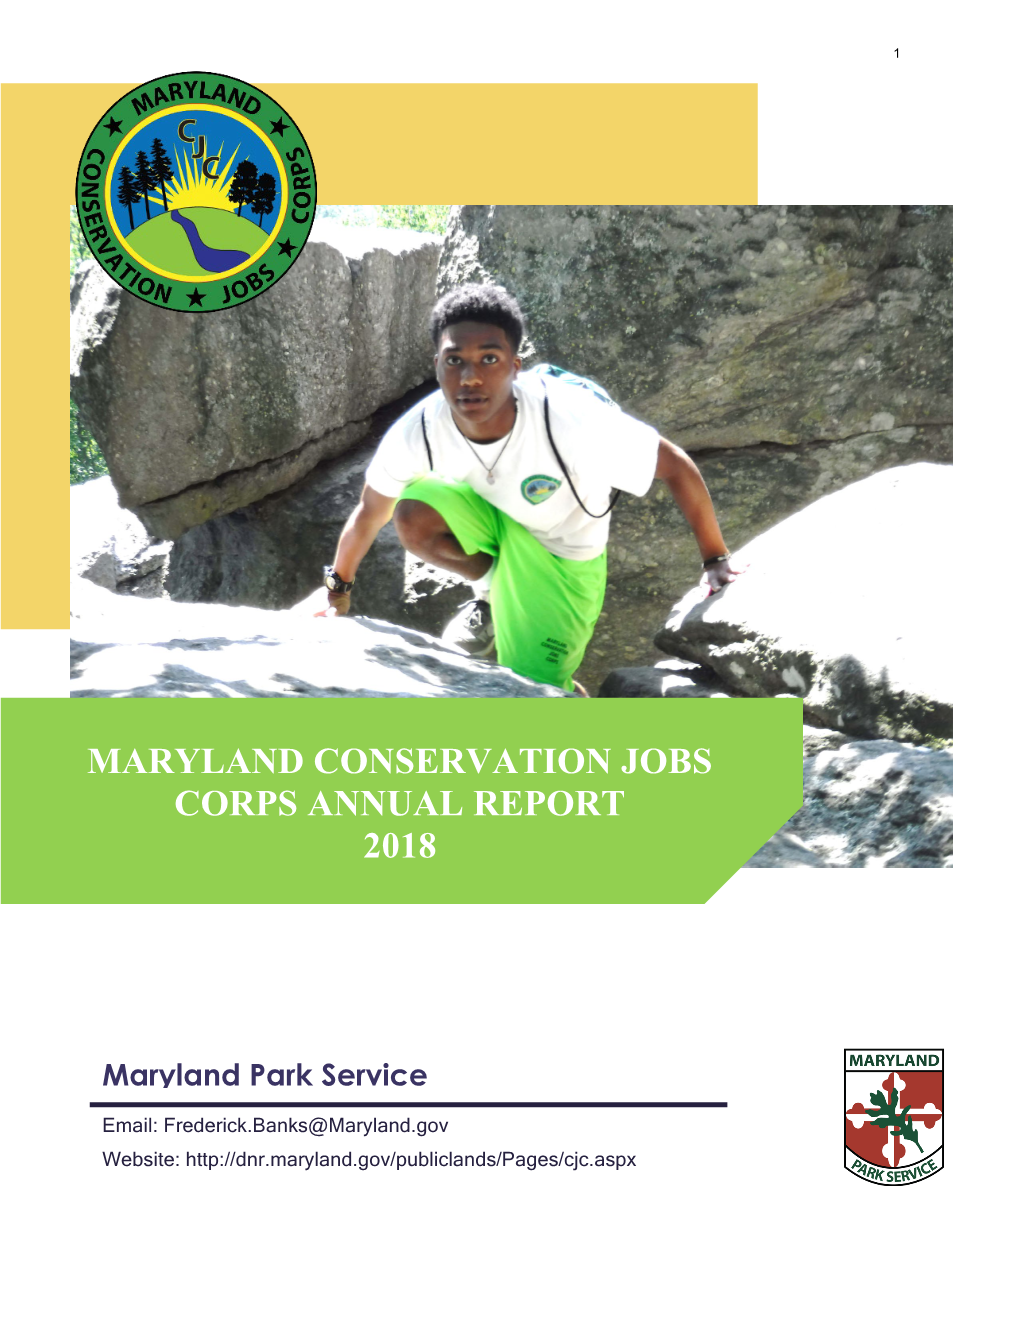 Maryland Conservation Jobs Corps Annual Report 2018